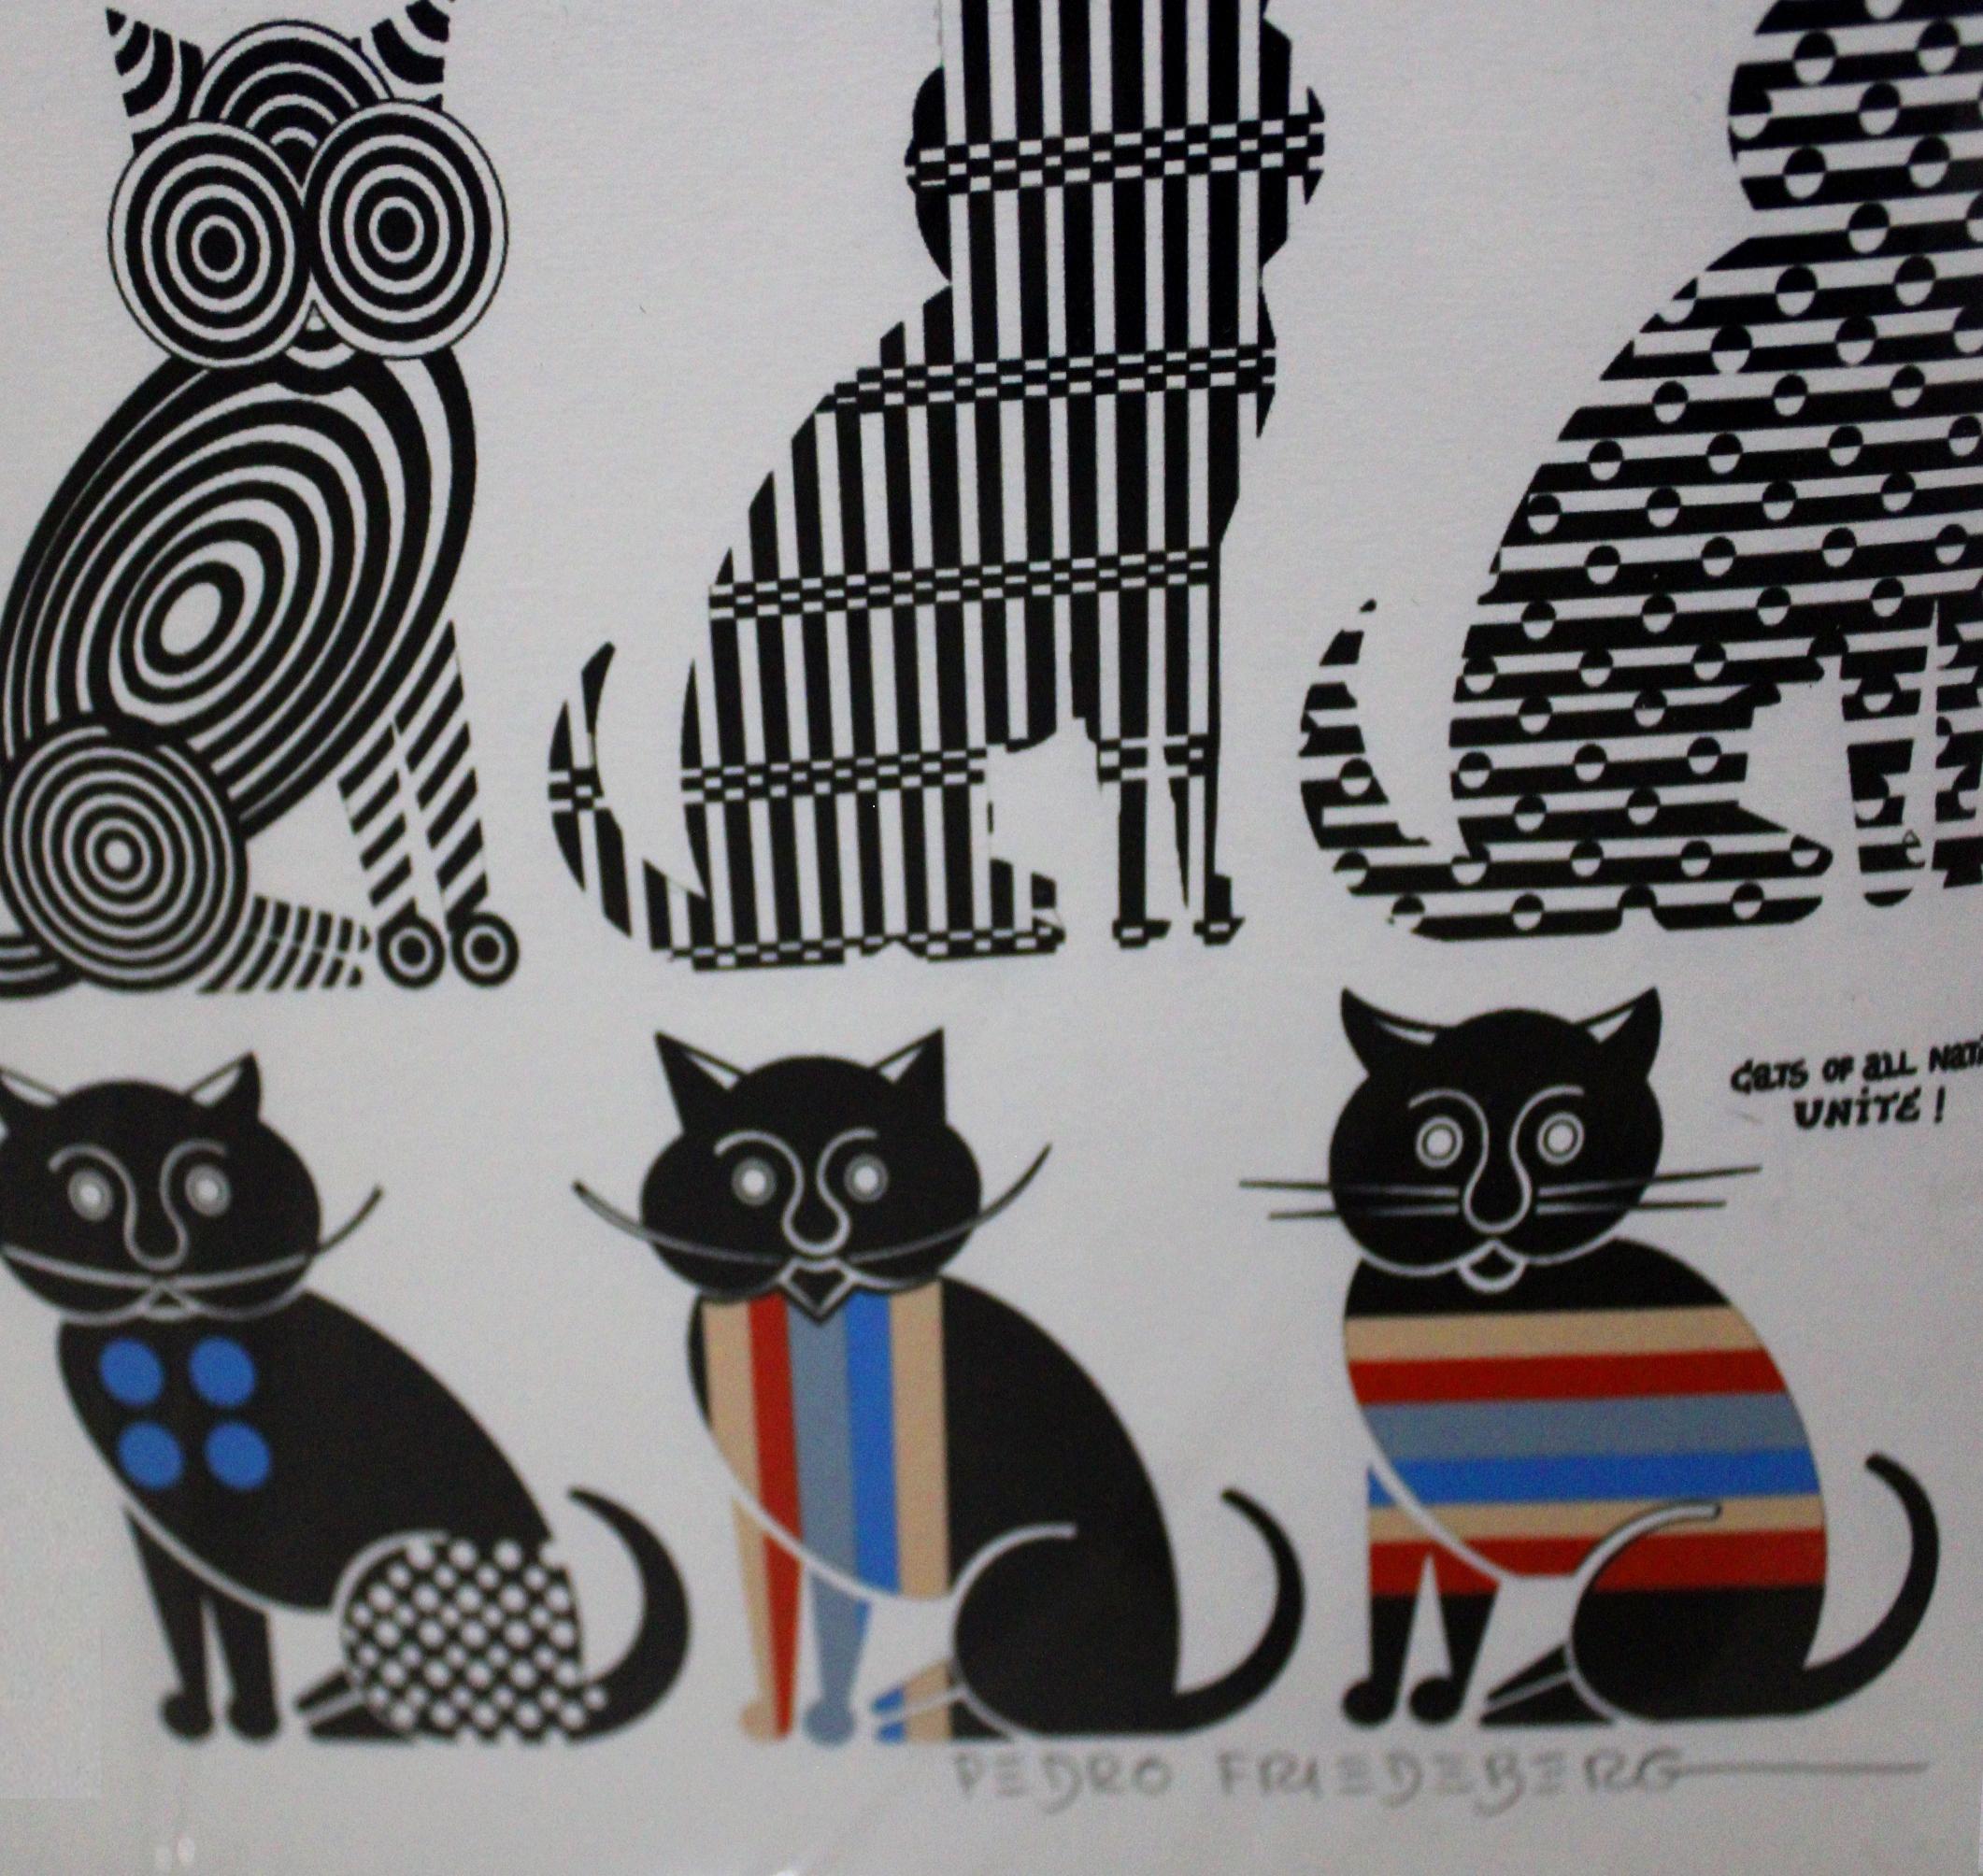 Cats of all nations unite! - Print by Pedro Friedeberg